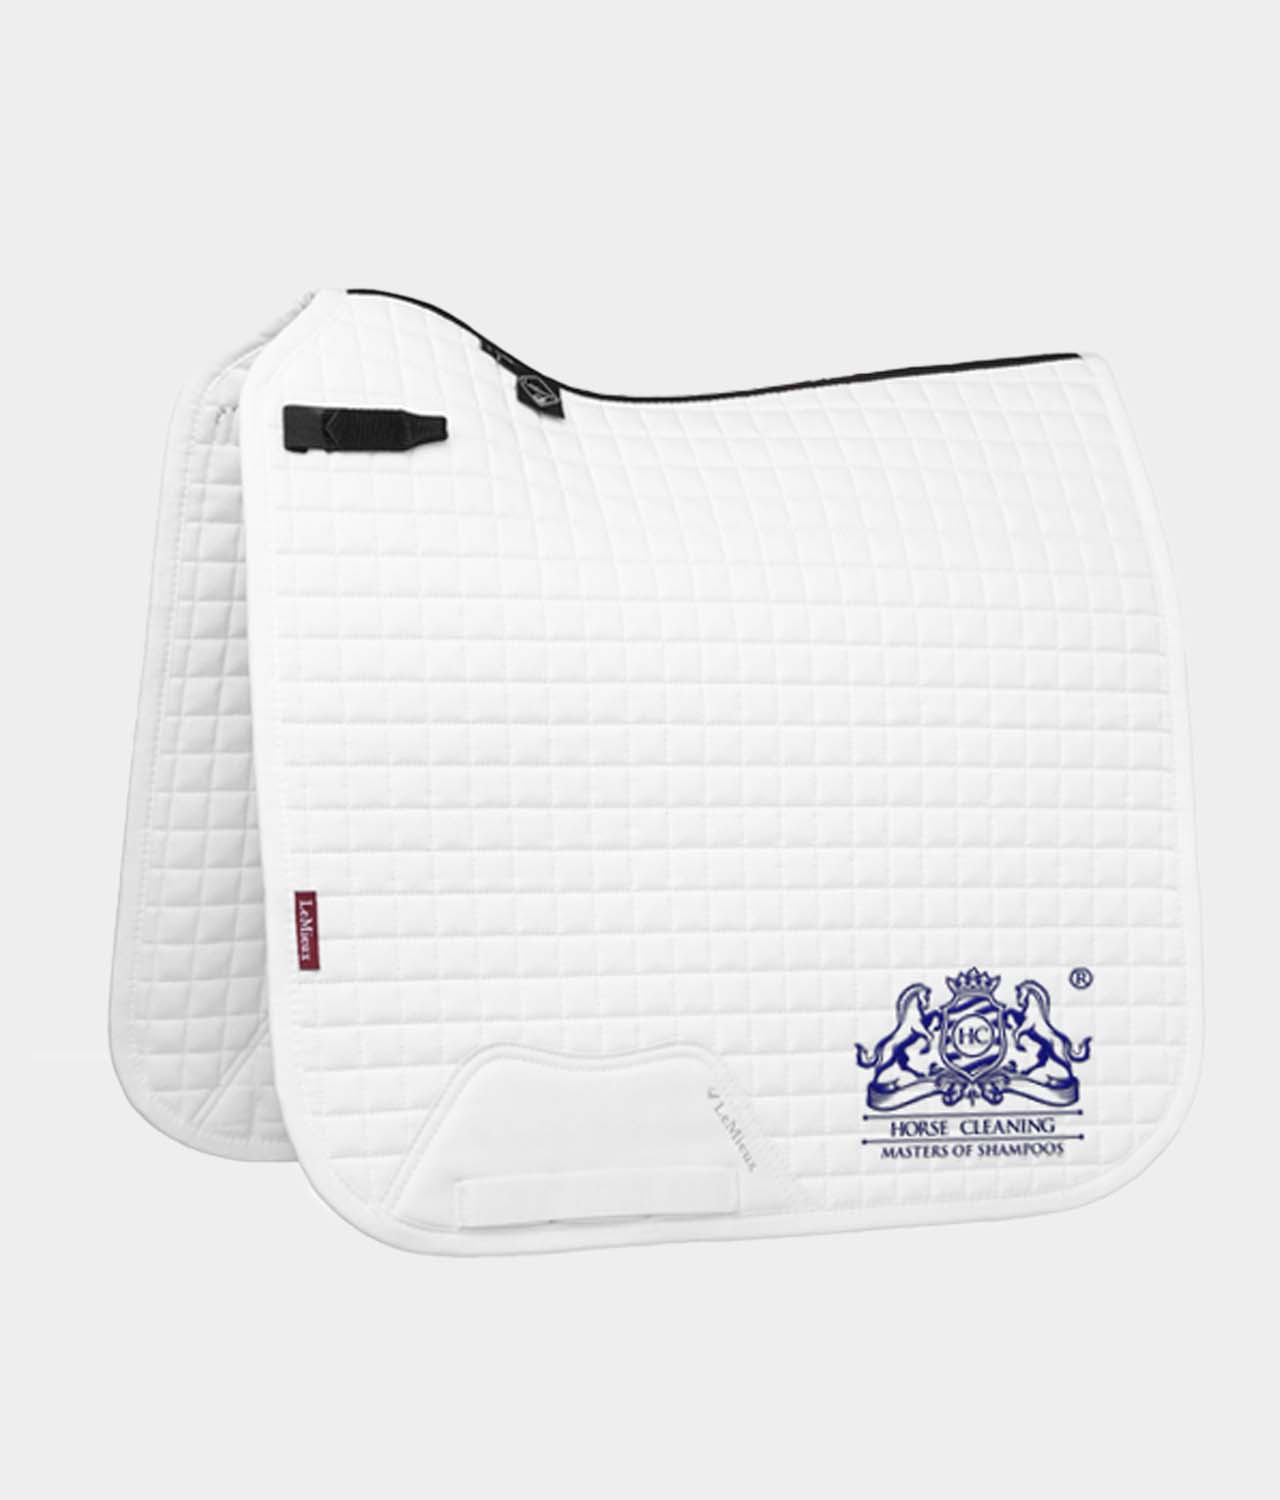 Horse Cleaning ProSport White Cotton Dressage Square Saddle Pad - Horse Cleaning Masters Of Shampoos ™